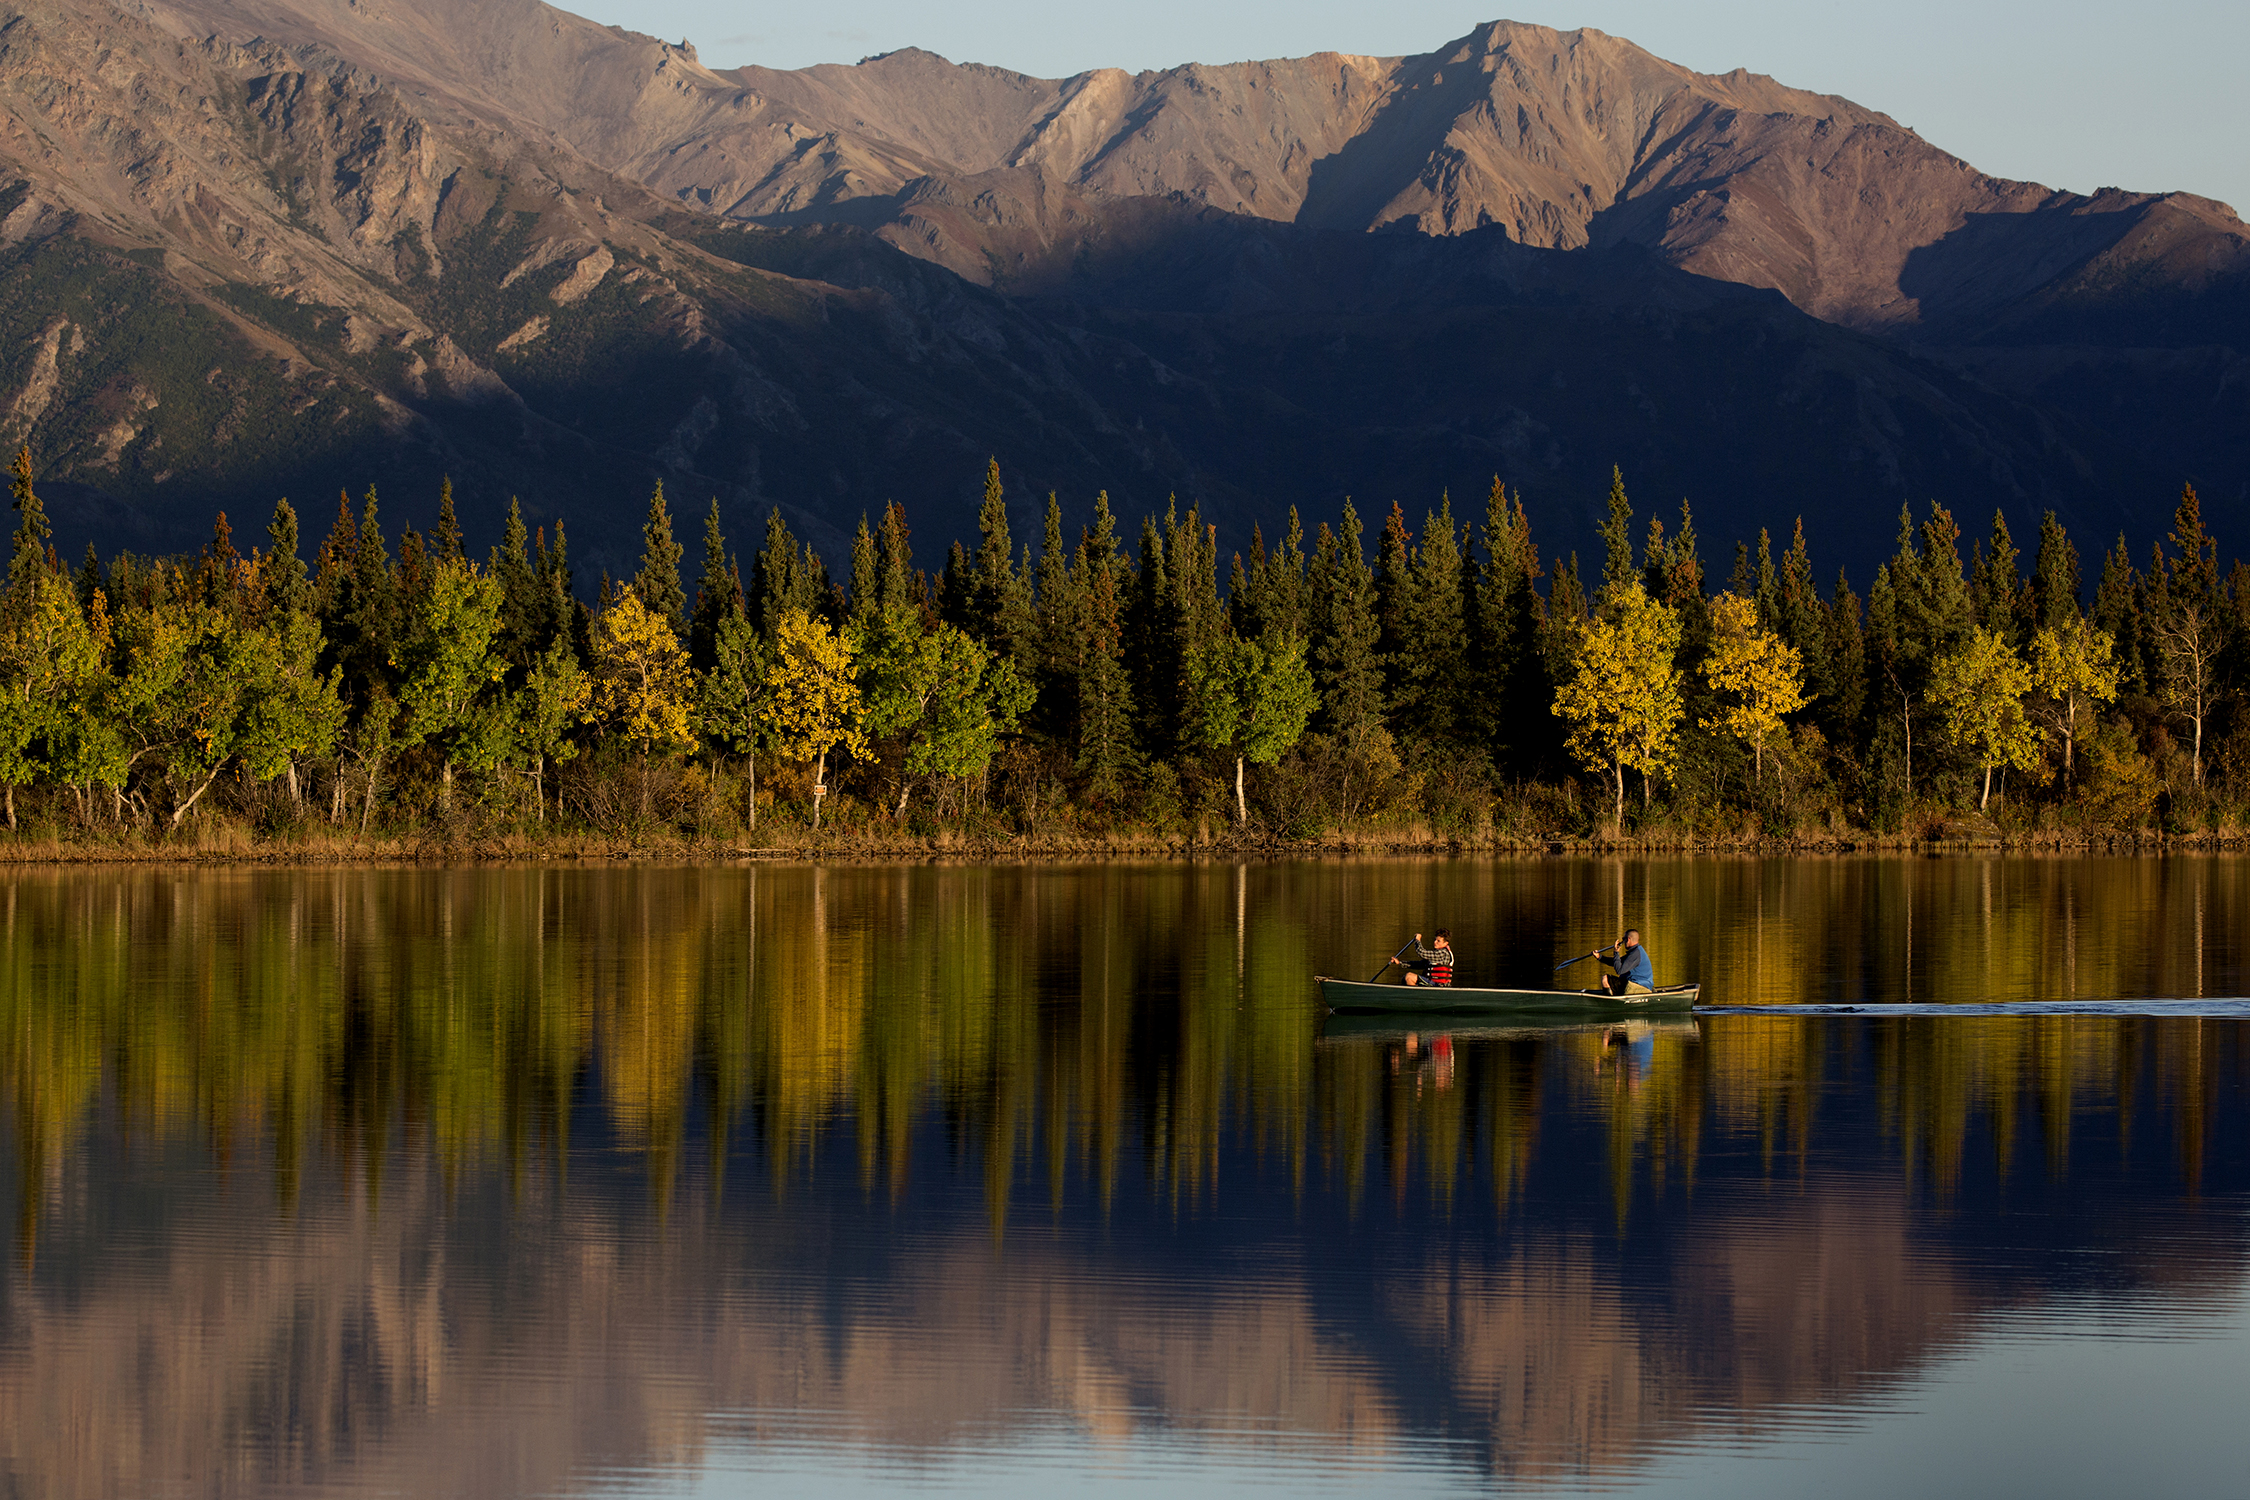  Kayakers glide over calm mirror-like Otto Lake with autumn turning leaves into a yellow hue, located a couple miles outside Healy, Alaska.&nbsp; © Photo by Gail Fisher    